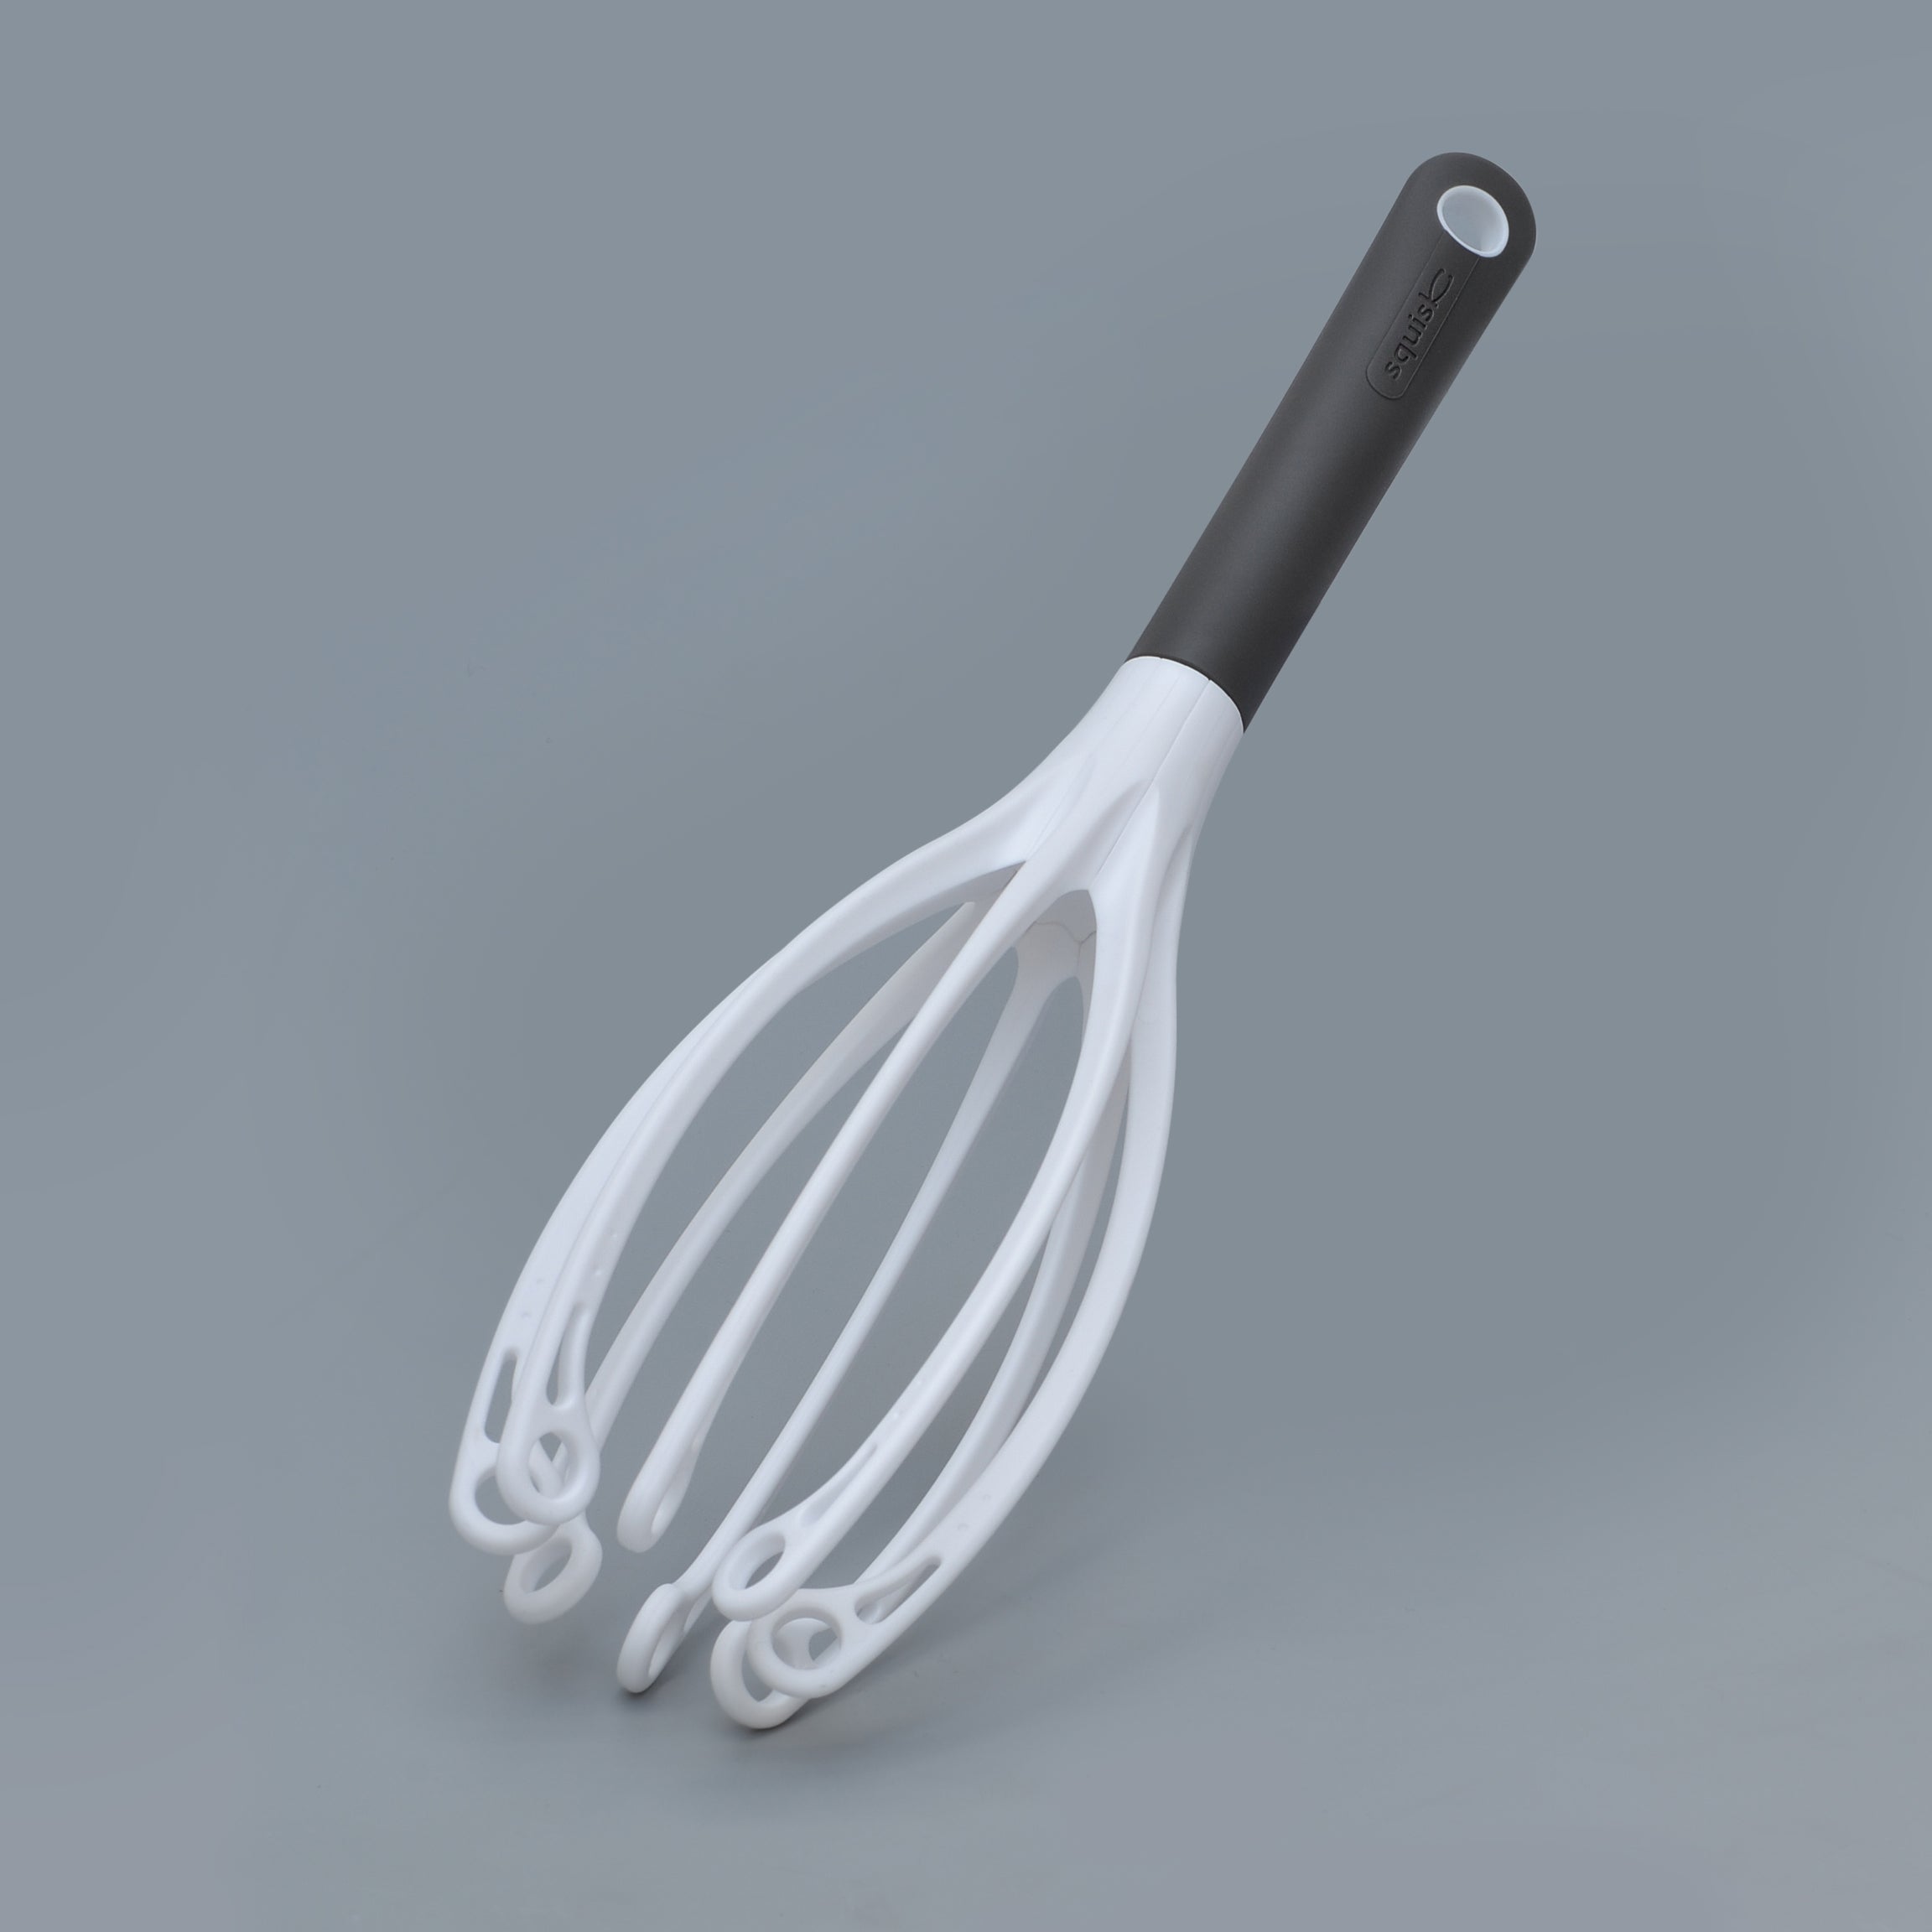 Double Balloon Whisk order online now